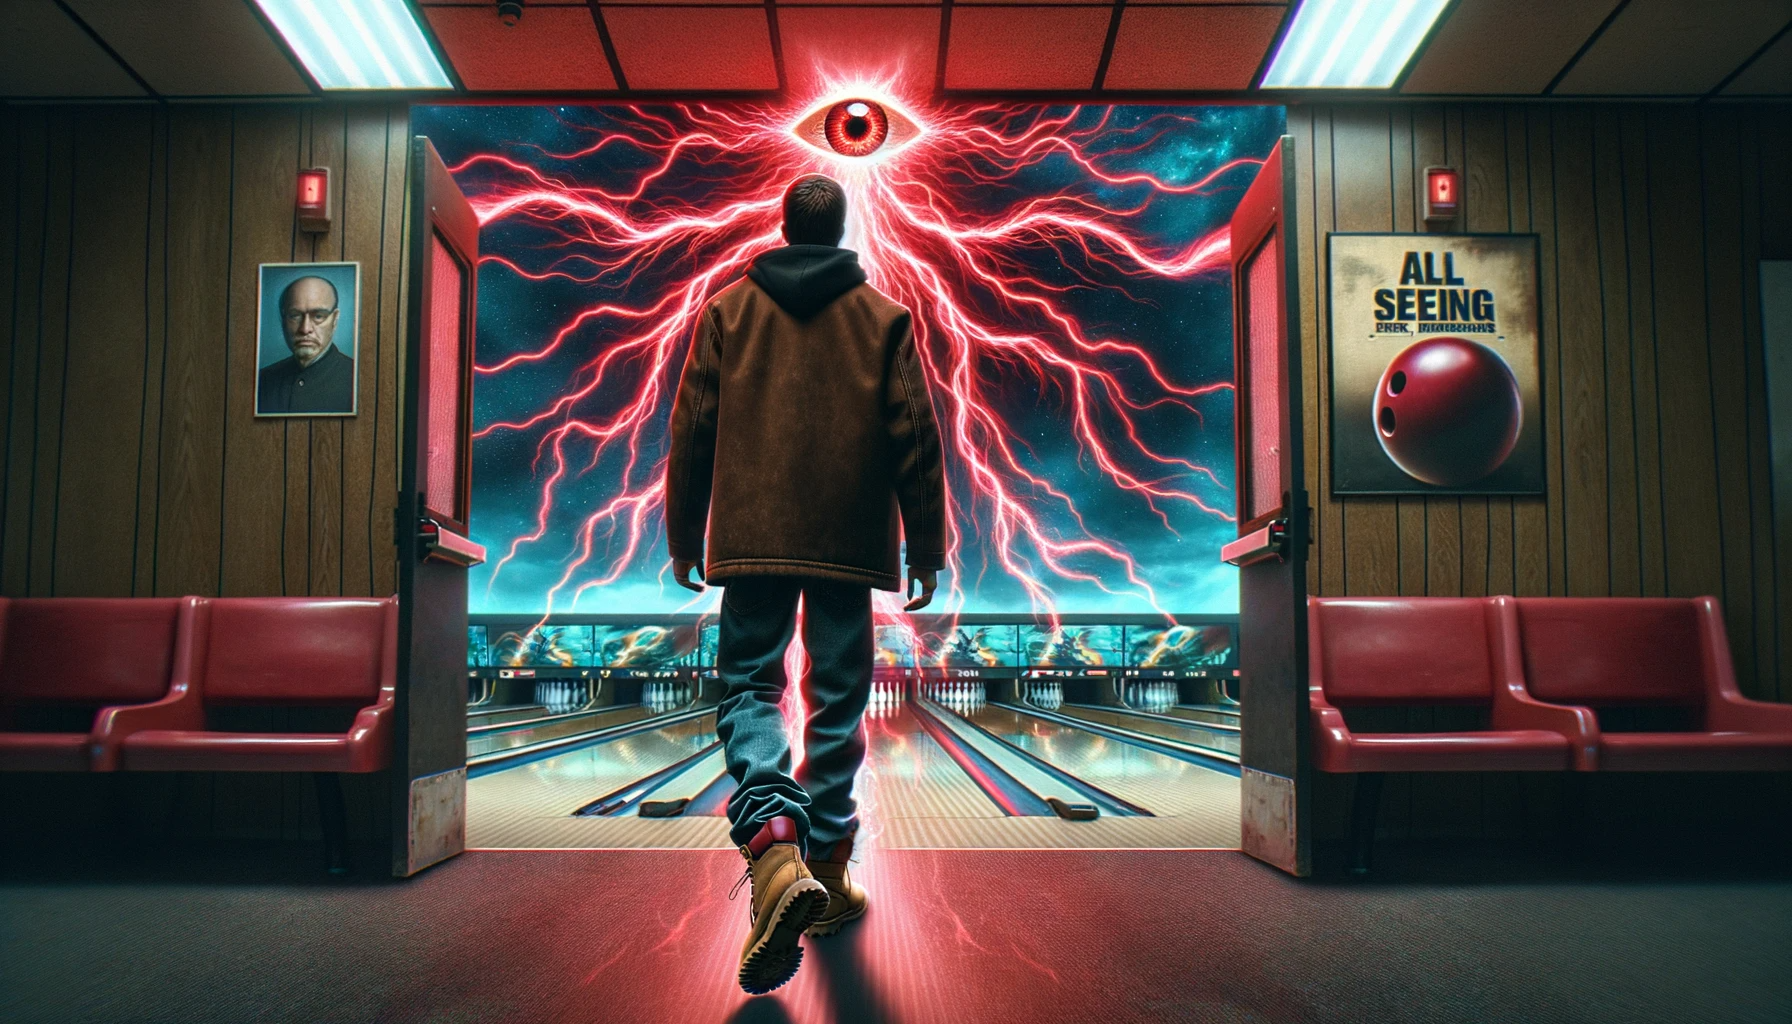 Dall·e 2023 10 31 18.24.54 Photo Of A Man Walking Into A Bowling Alley. The Sky Above Is Intense With Vibrant Red Plasma Tendrils Reaching Down Merging Into The Mans Body In -